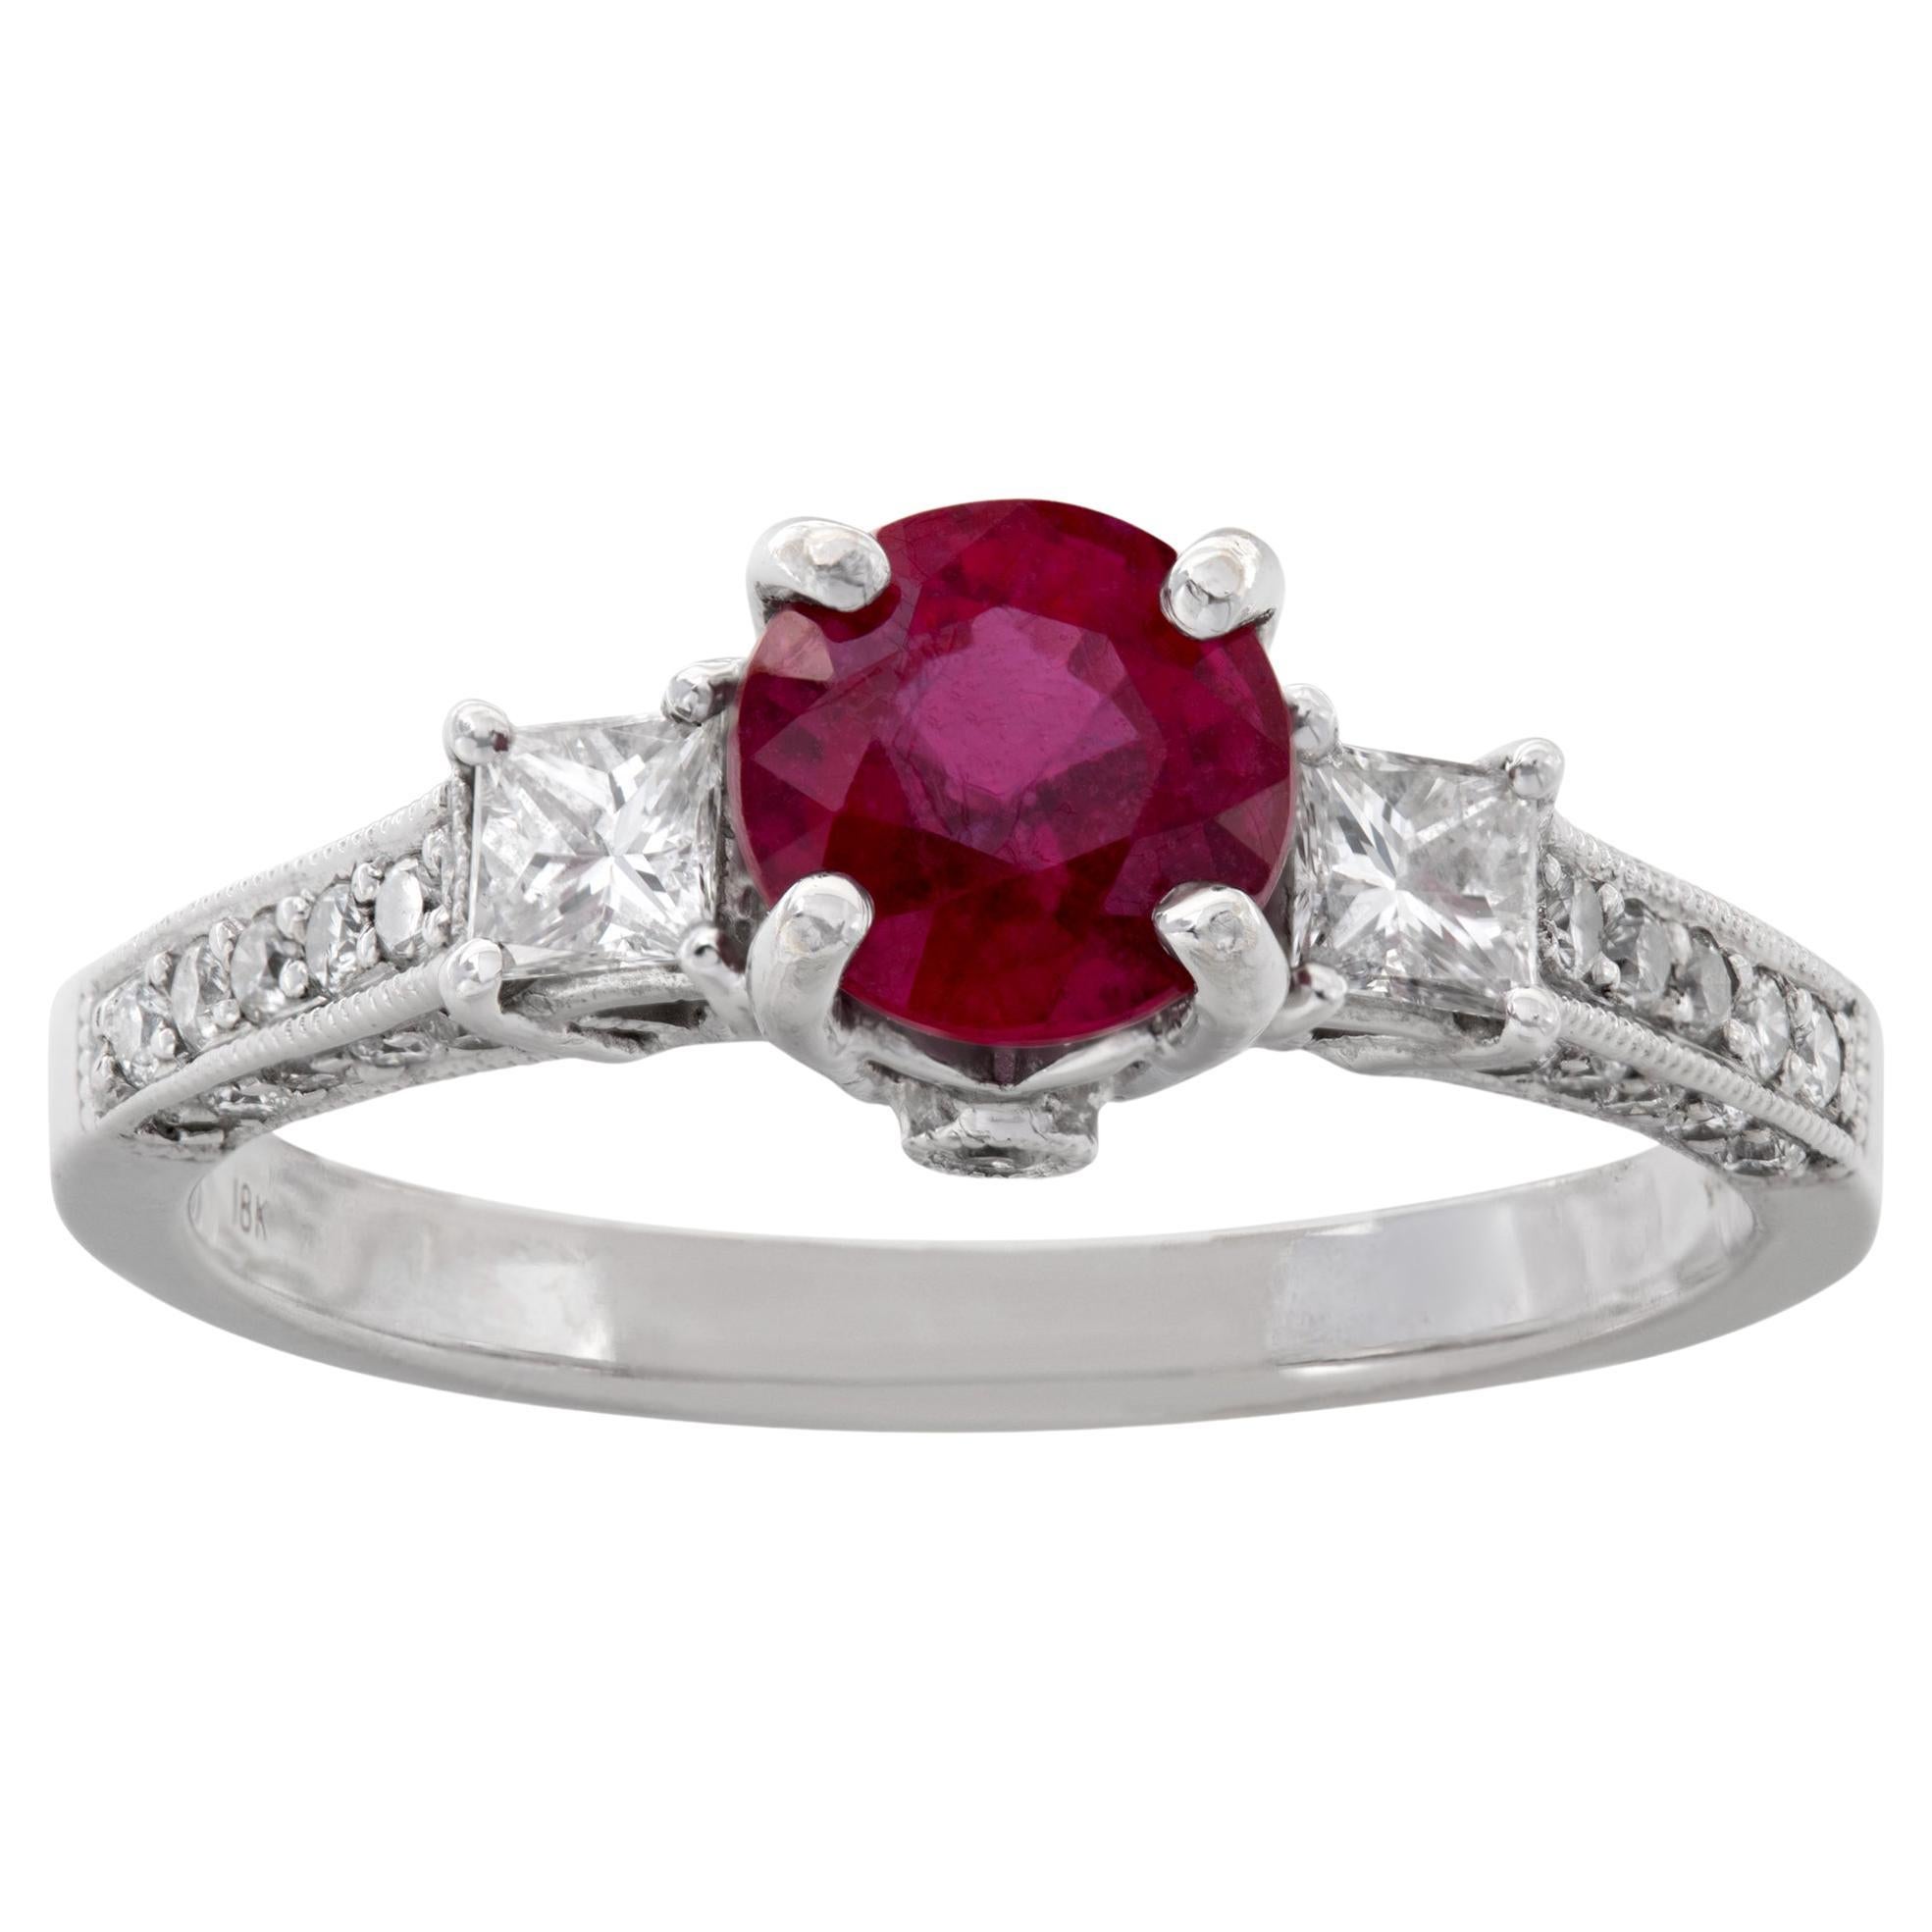 White gold ring w/ approx 0.80 ct princess cut ruby w/ approx 0.30 ct of diamond